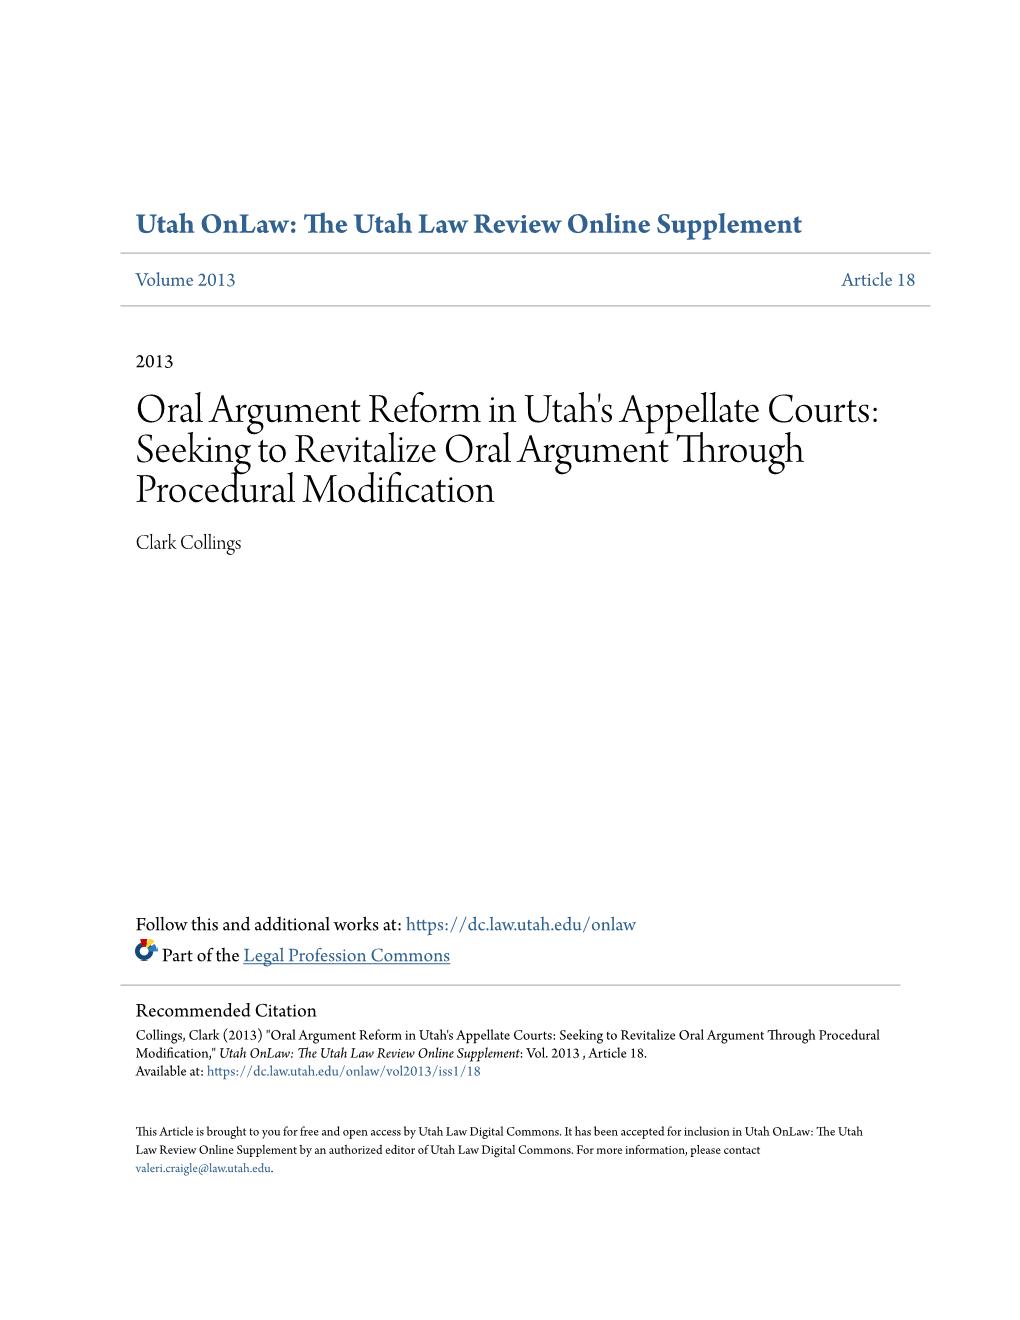 Oral Argument Reform in Utah's Appellate Courts: Seeking to Revitalize Oral Argument Through Procedural Modification Clark Collings